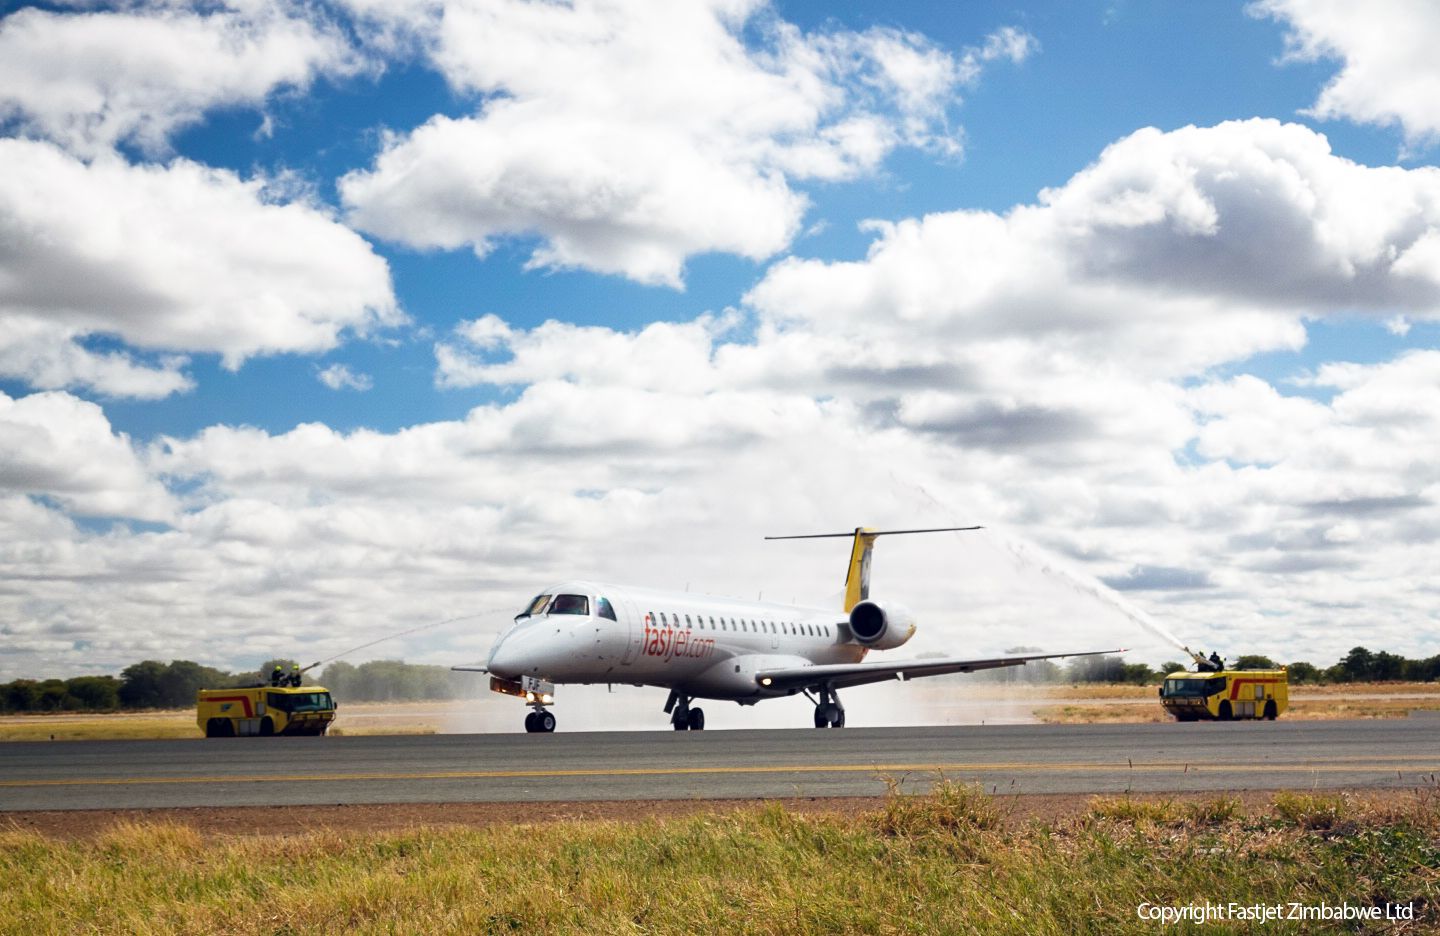 Fastjet Zimbabwe apologises for schedule changes and delays